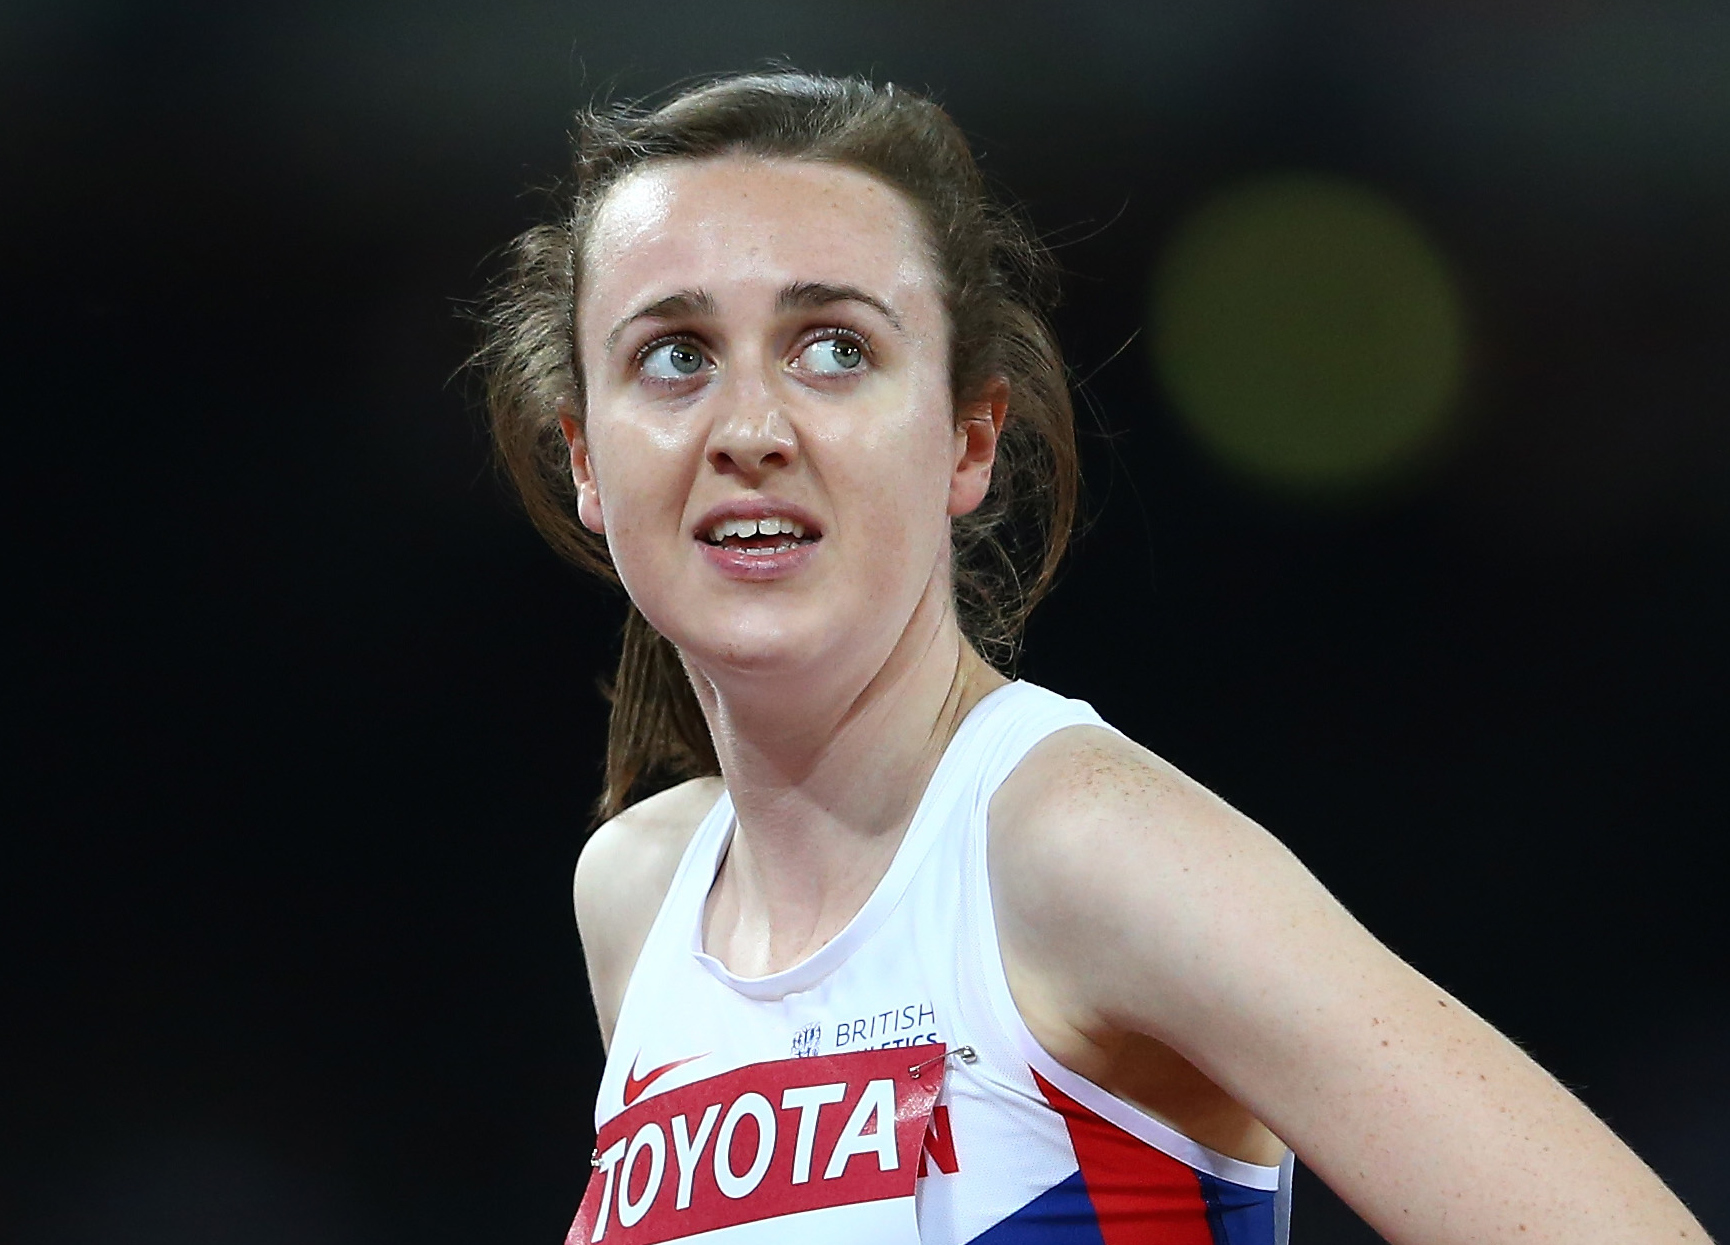 Laura Muir of Great Britain looks on after competing in the Women's 1500 metres semi-final the during day two of the 15th IAAF World Athletics Championships Beijing 2015 at Beijing National Stadium on August 23, 2015